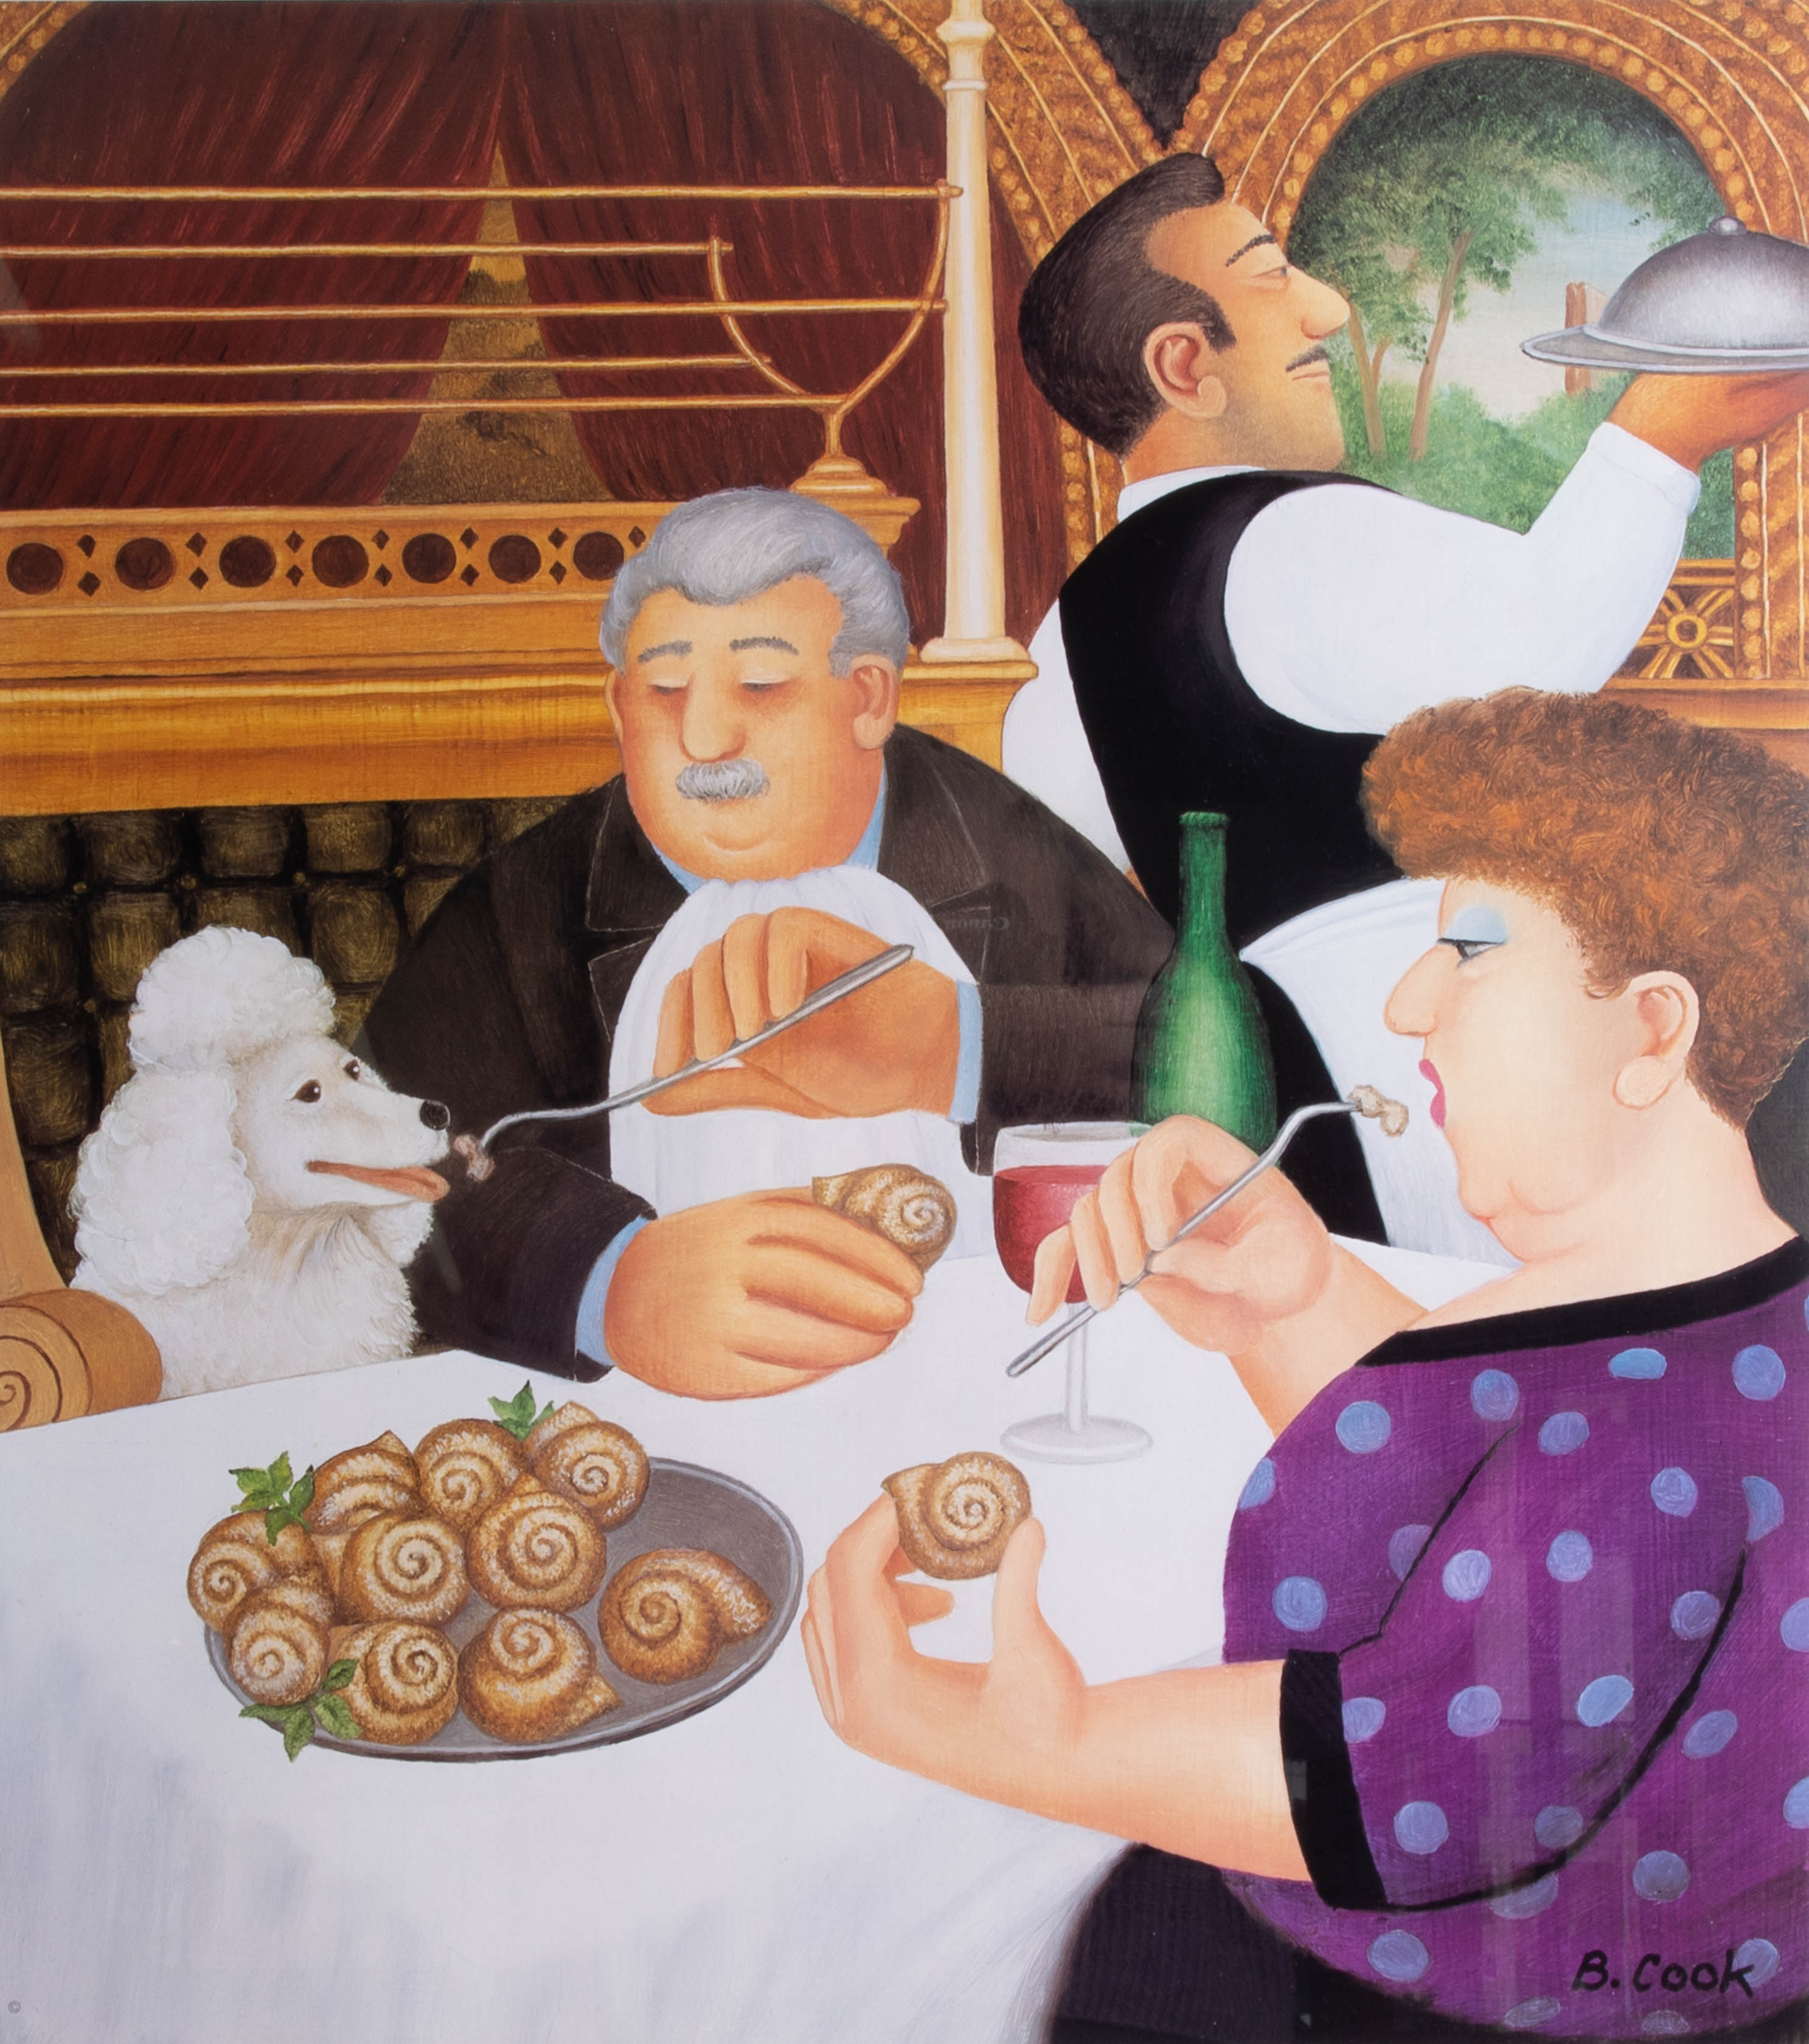 Beryl Cook, signed edition print 'Dining in Paris', 649/650 published by Alexander Gallery, - Image 2 of 2